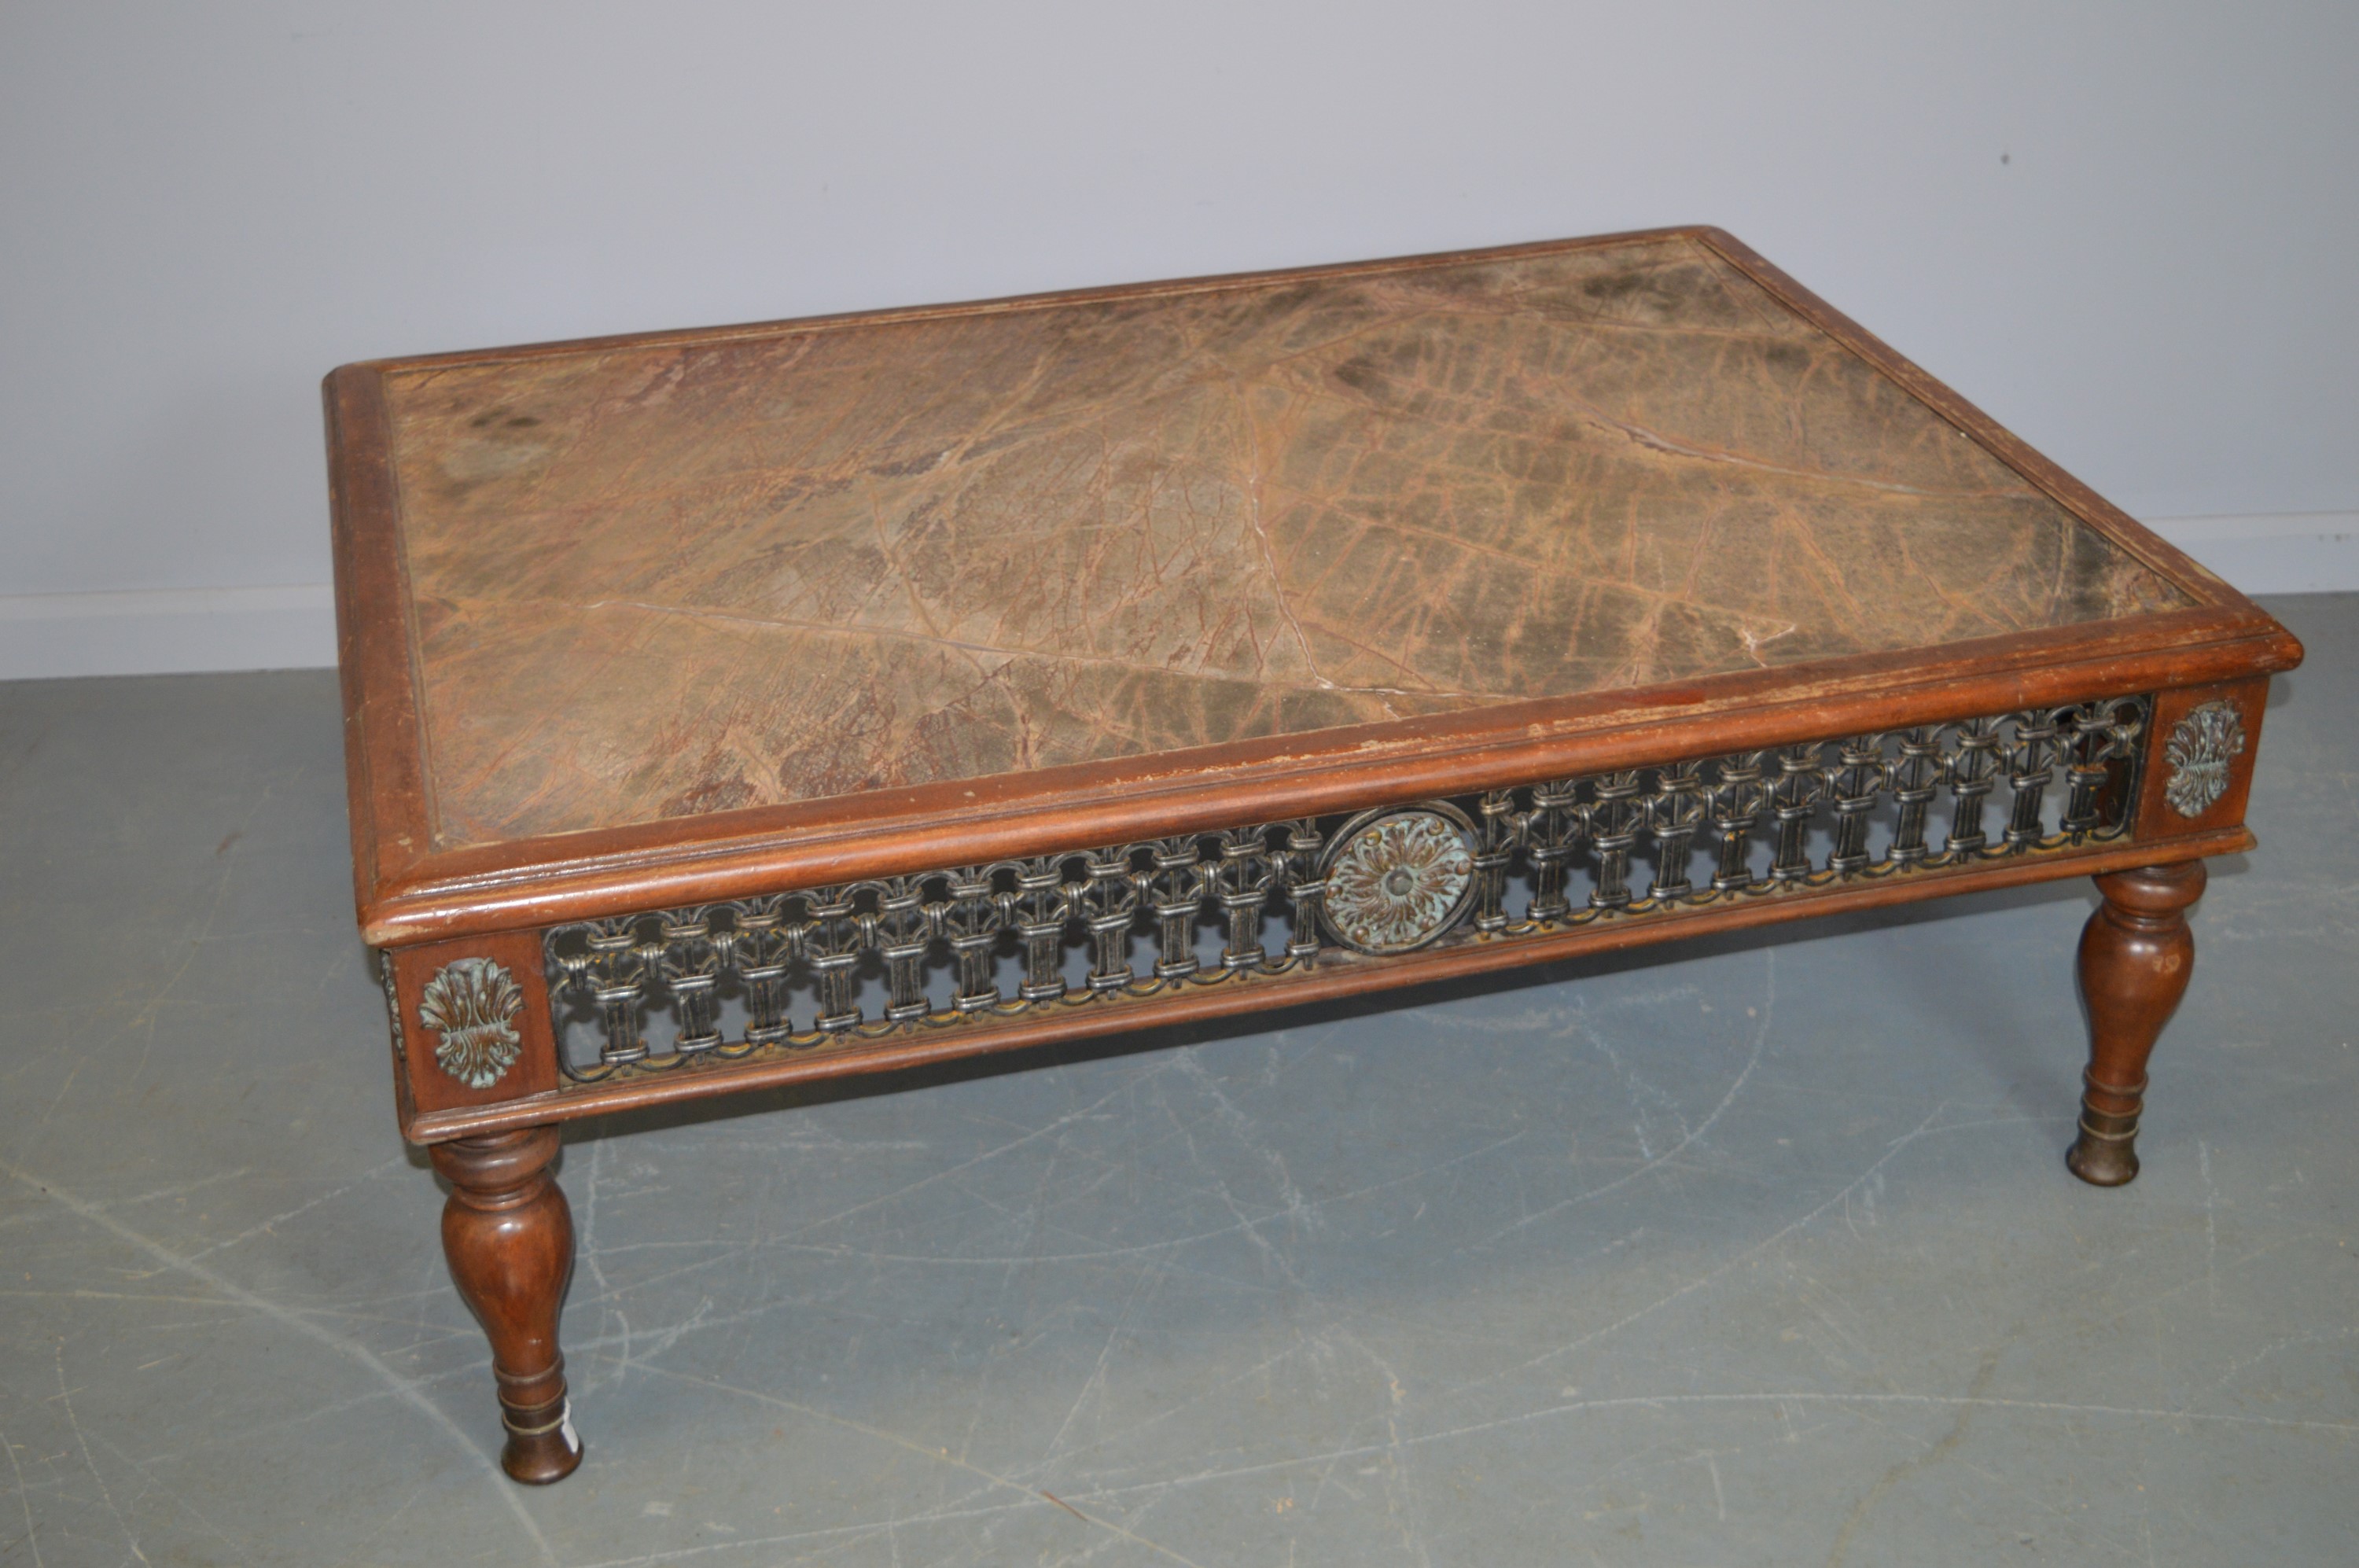 20th Century marble-topped coffee table